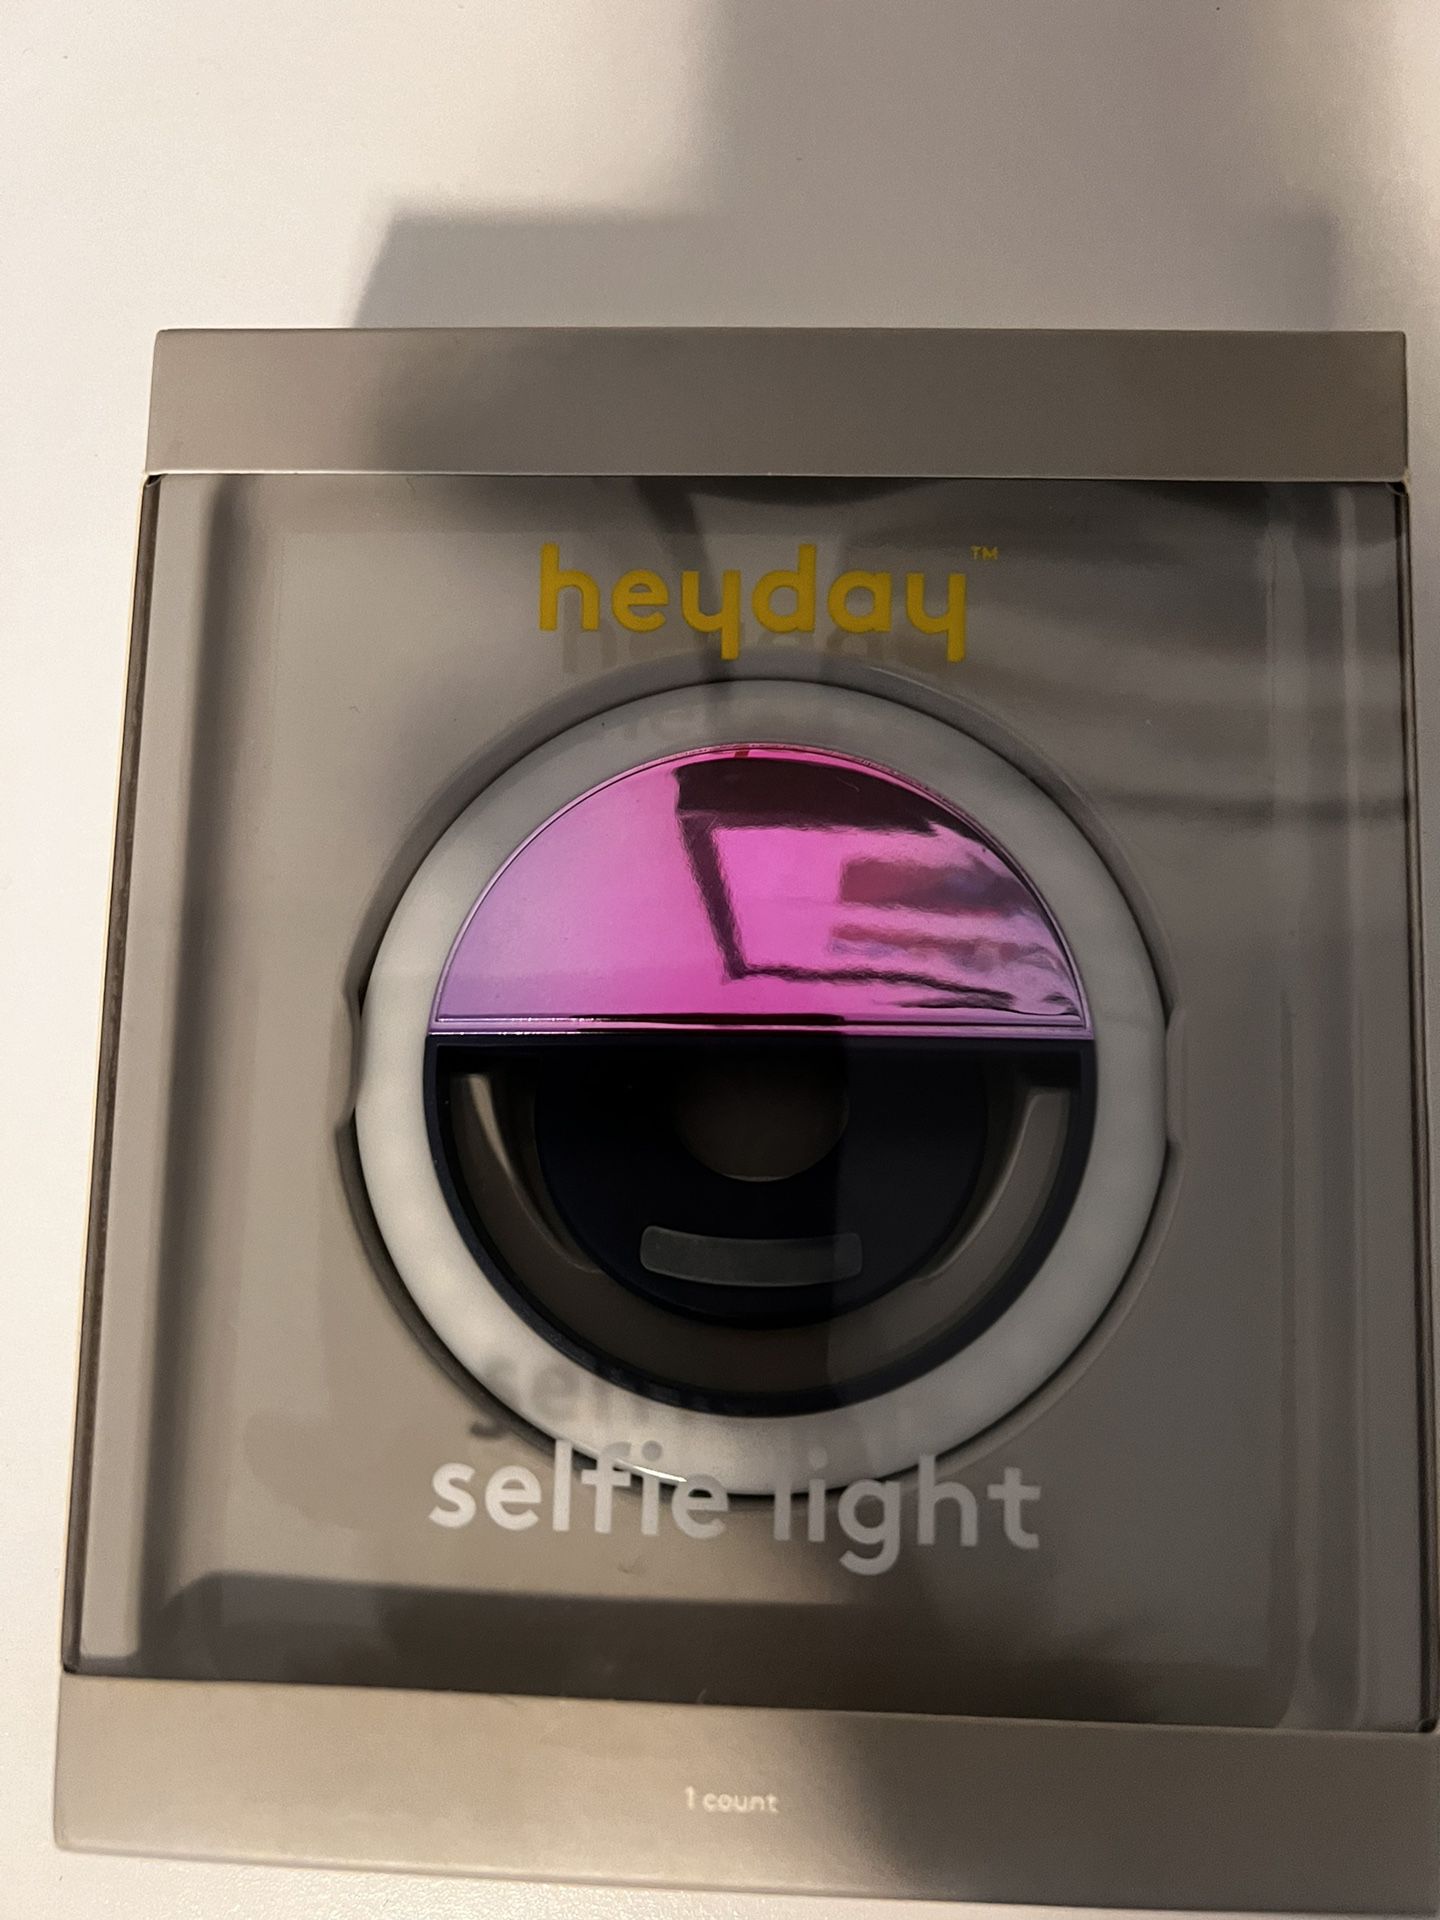 Brighten up your selfies with the Cell Phone Selfie Light from heyday. Styled in a ring shape, this ring selfie light makes your selfies look bright e